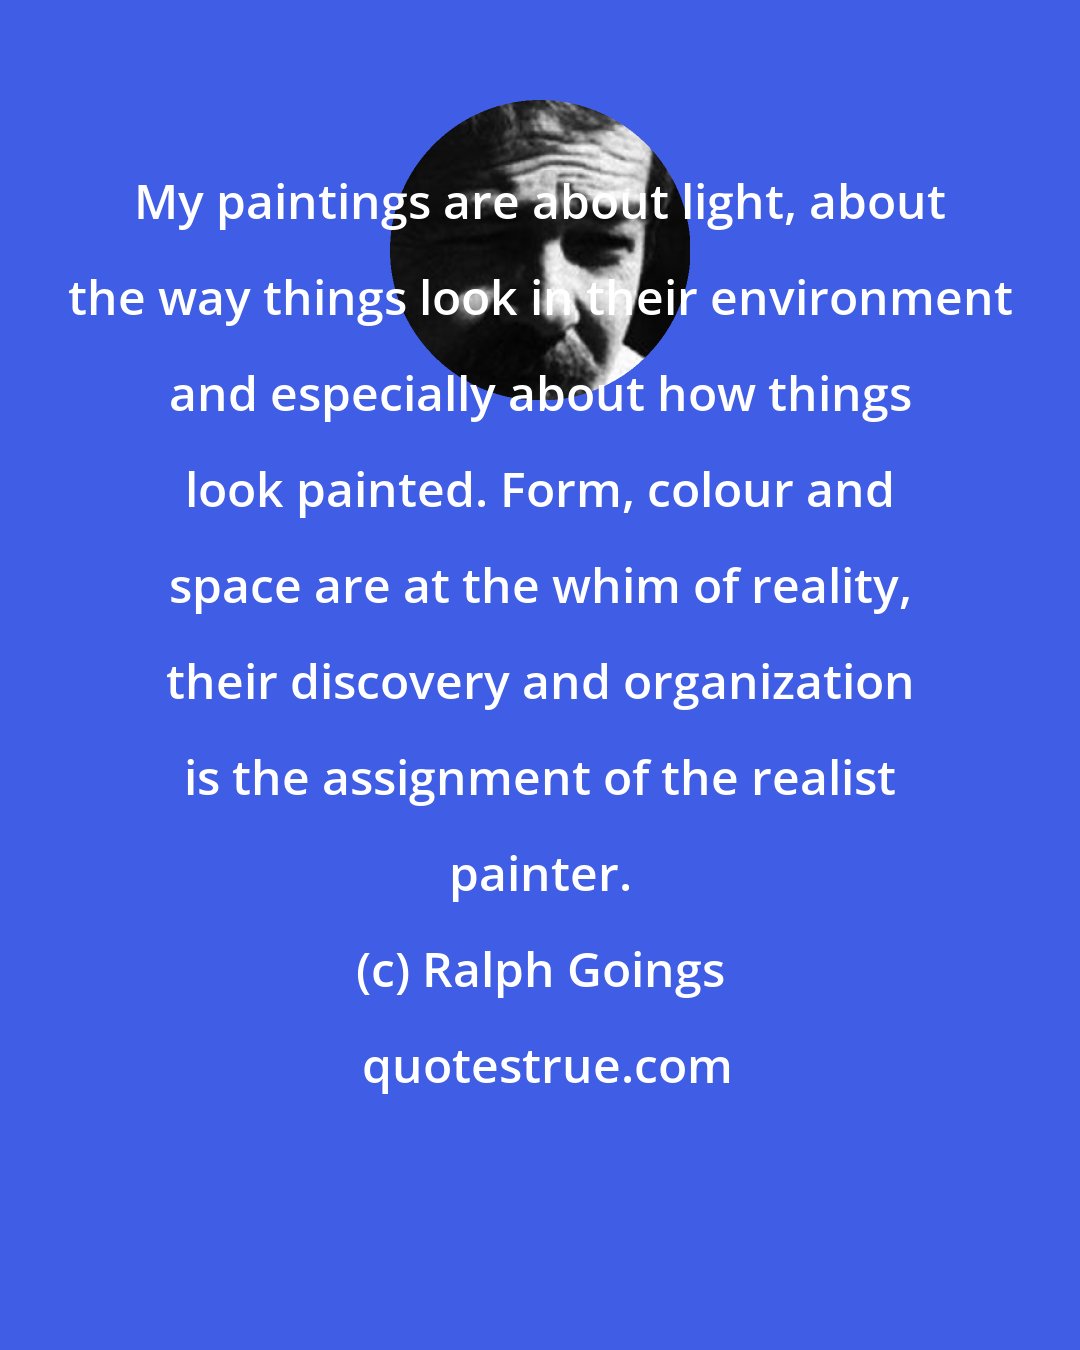 Ralph Goings: My paintings are about light, about the way things look in their environment and especially about how things look painted. Form, colour and space are at the whim of reality, their discovery and organization is the assignment of the realist painter.